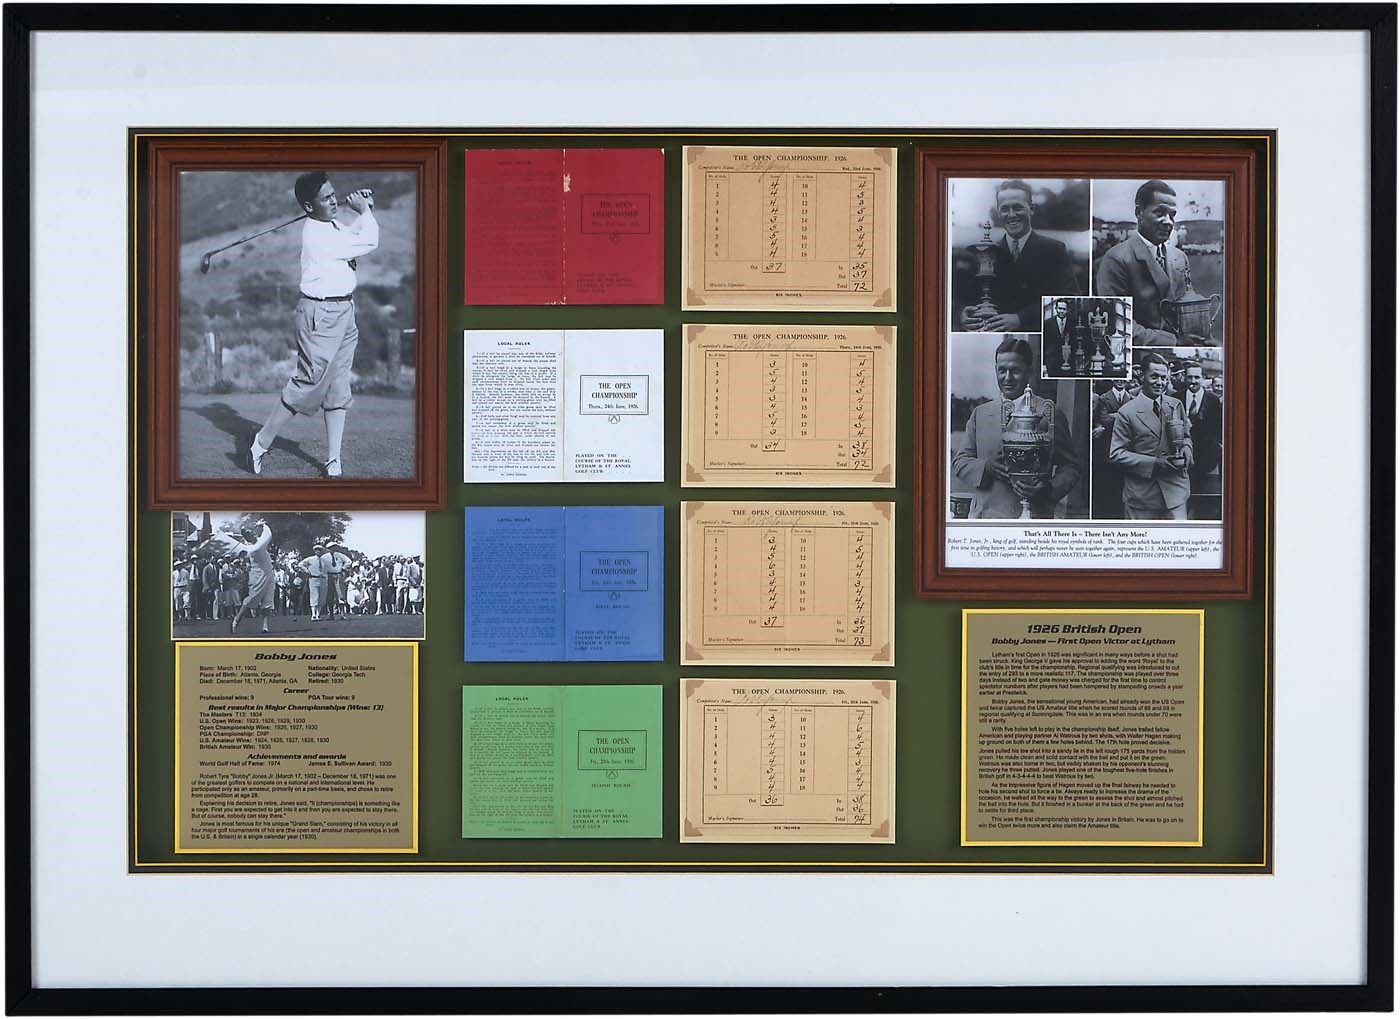 Olympics and All Sports - Historic Bobby Jones 1926 British Open Tournament Complete Set of Signed Scorecards (PSA)